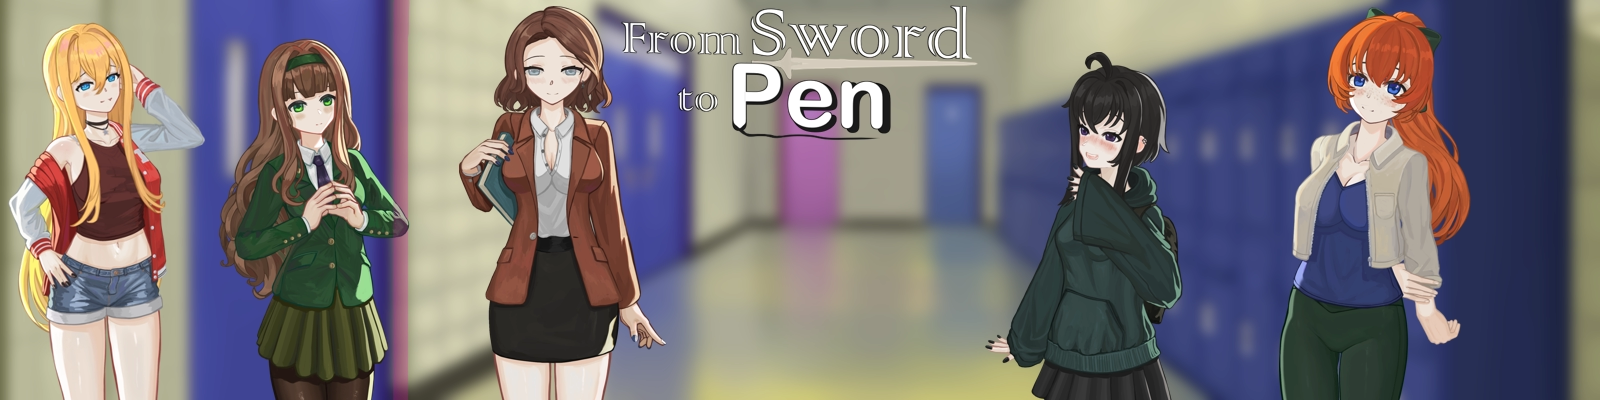 From Sword to Pen1.png